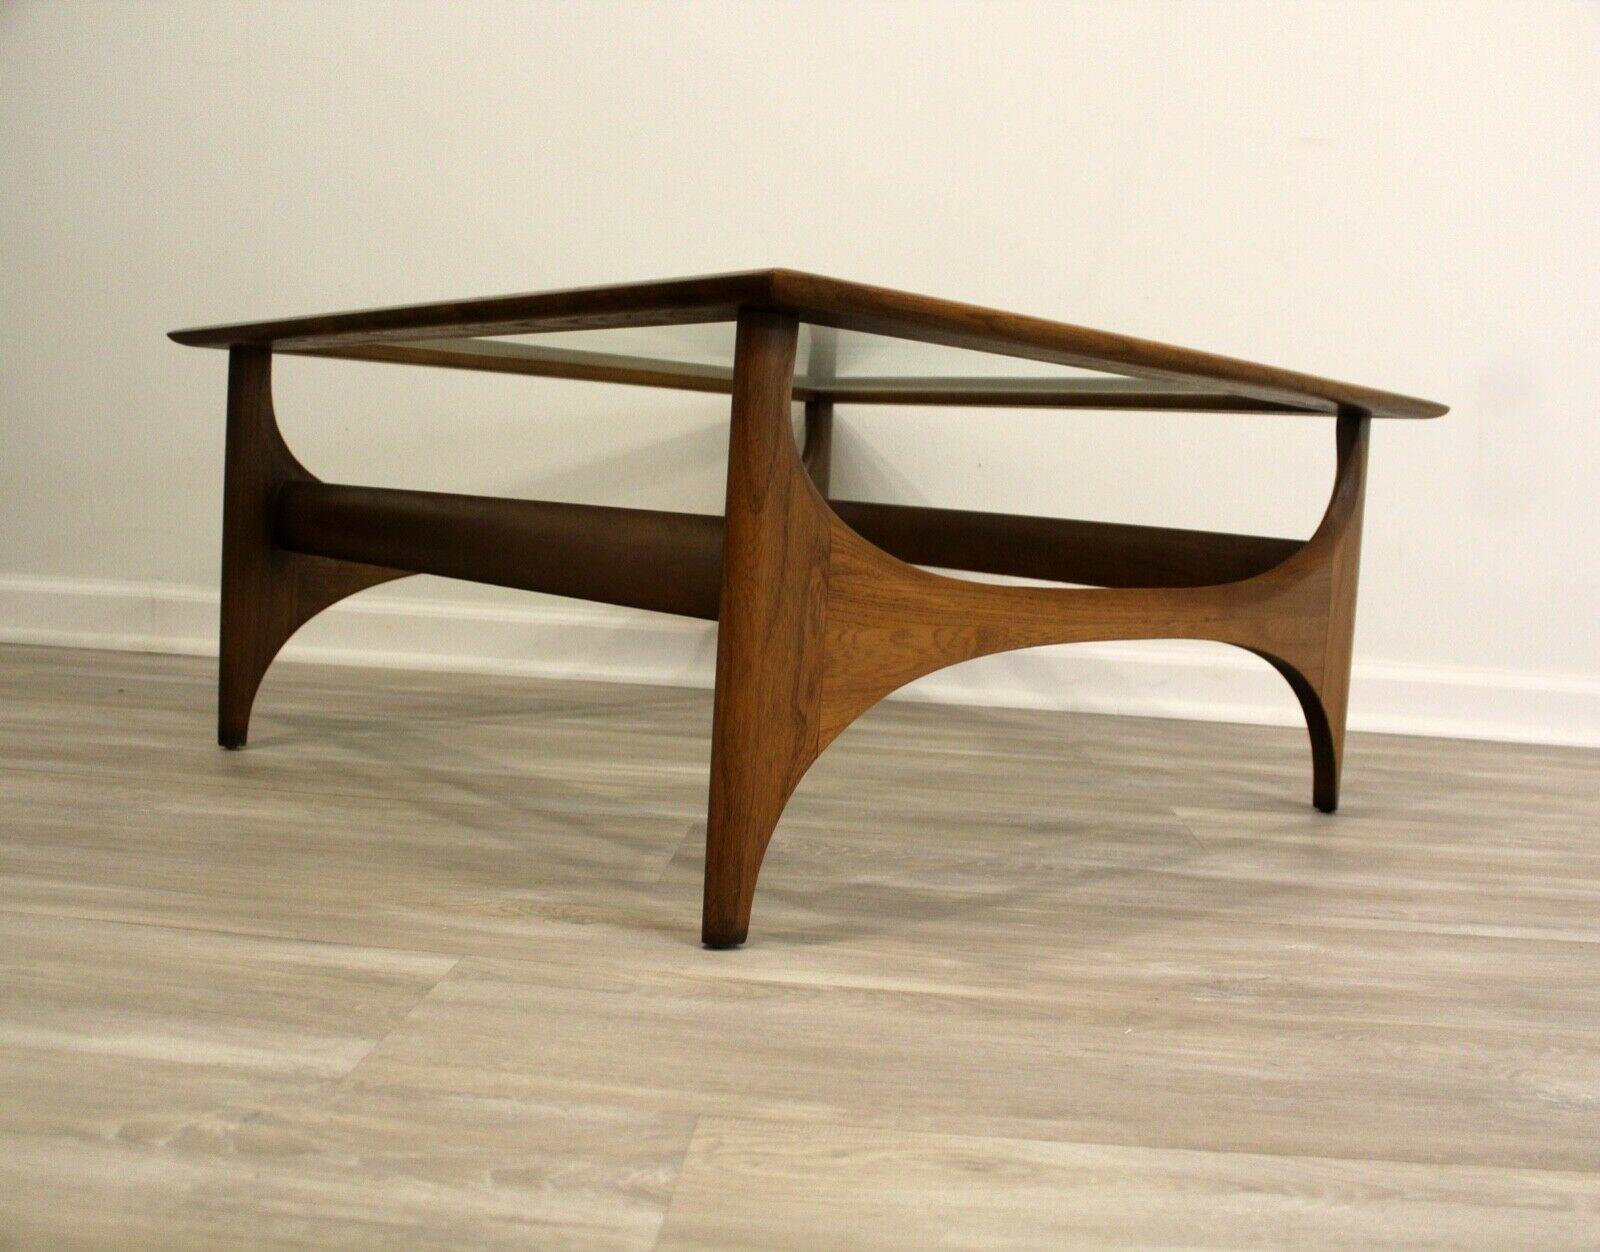 20th Century Mid-Century Modern Sculptural End Side Table Walnut Wood by Lane